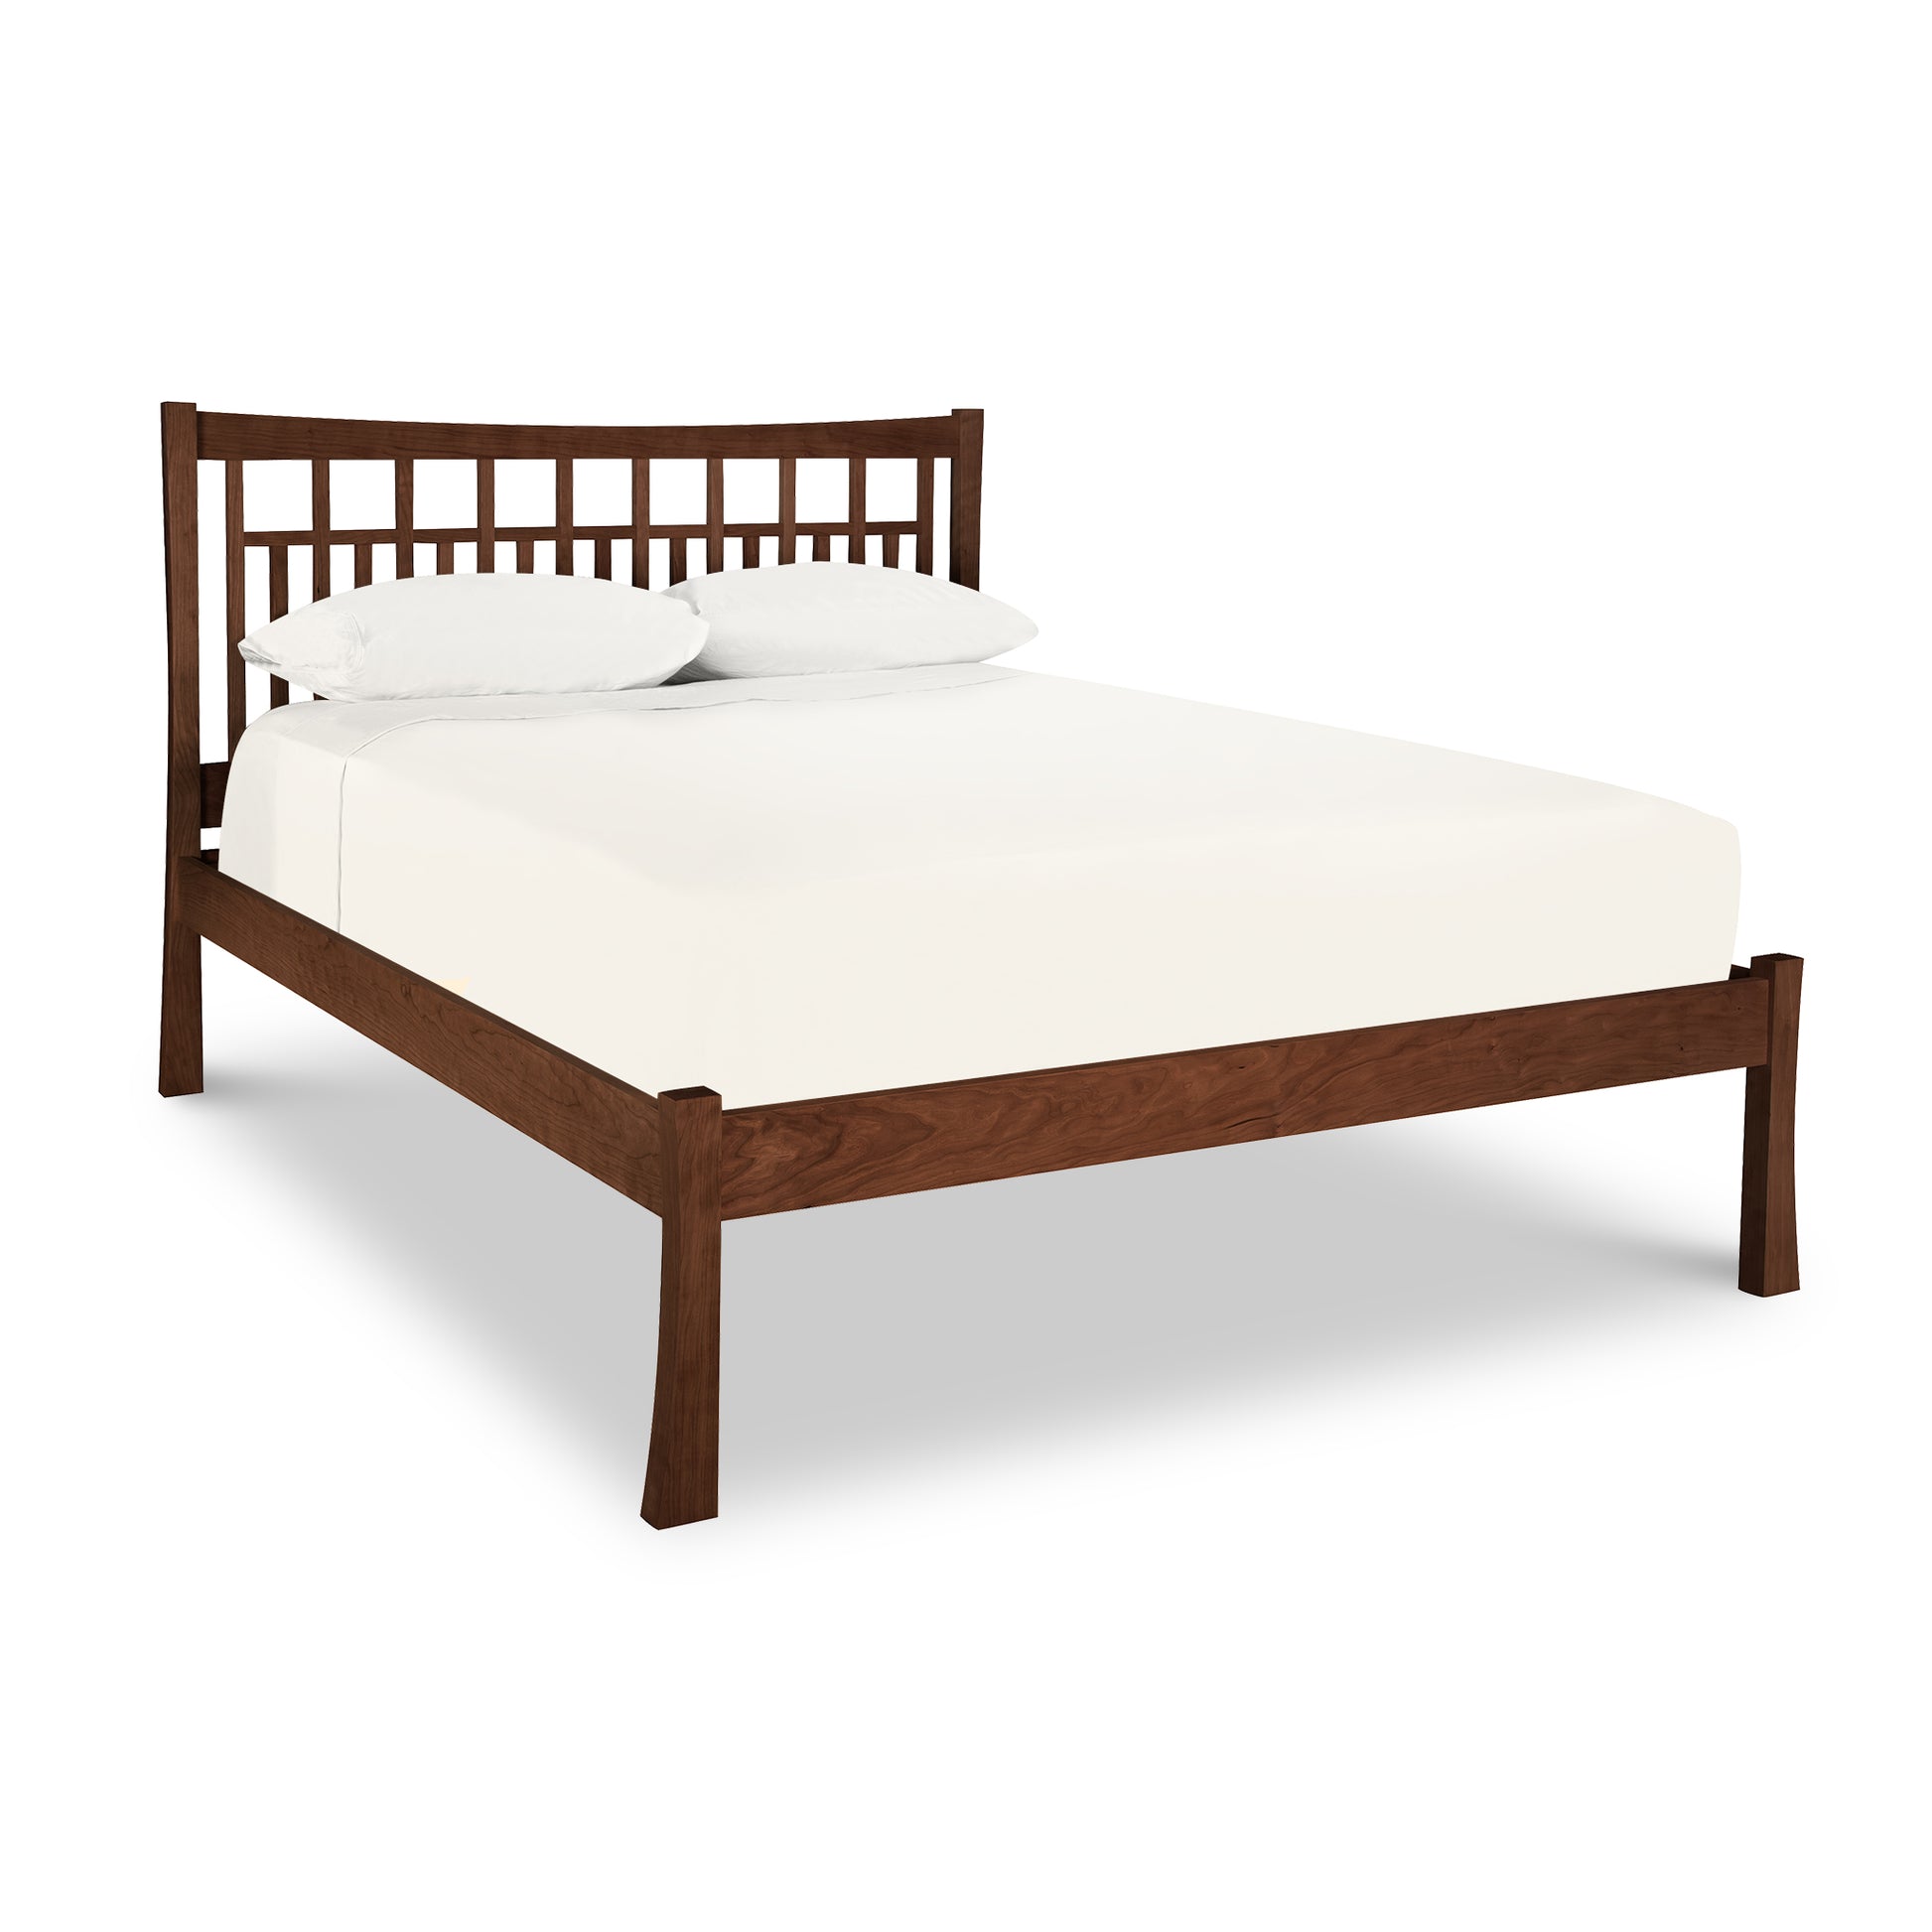 A Vermont Furniture Designs Contemporary Craftsman Low Footboard Bed made from solid wood with an eco-friendly oil finish, including a white mattress and two pillows against a white background.